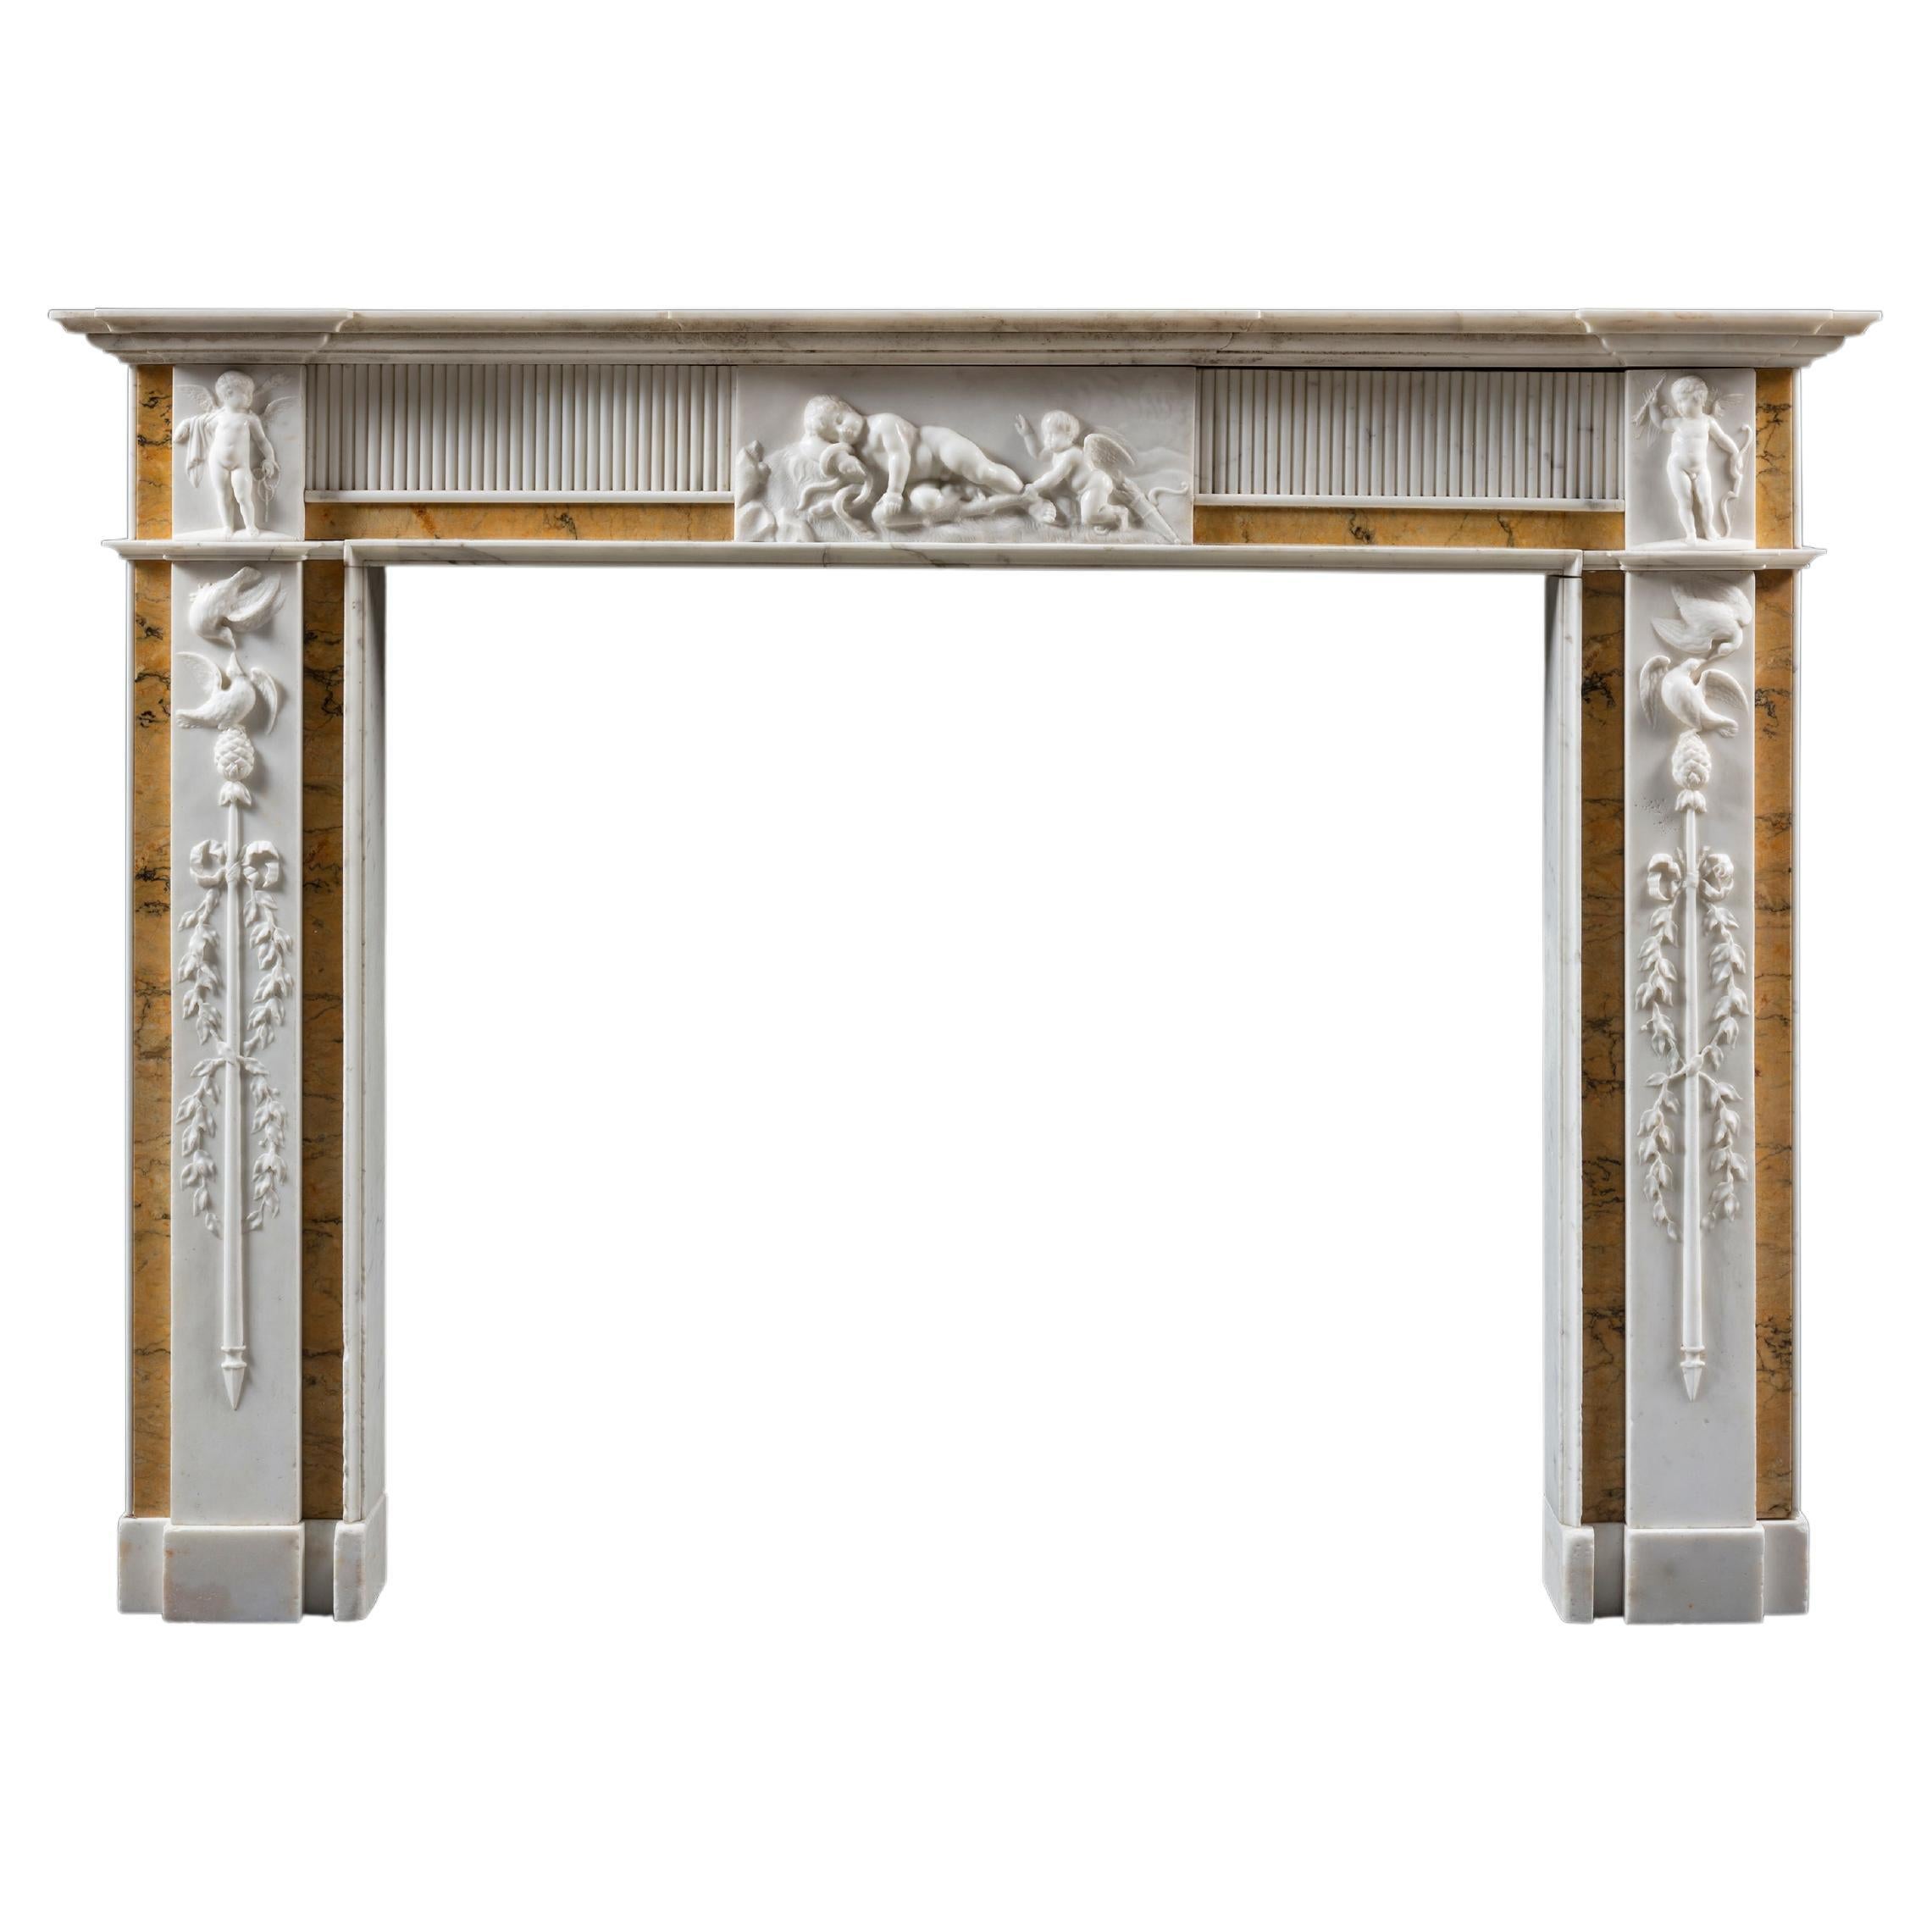 Irish George III Neoclassical Mantle in Statuary Marble with Sienna Inlays